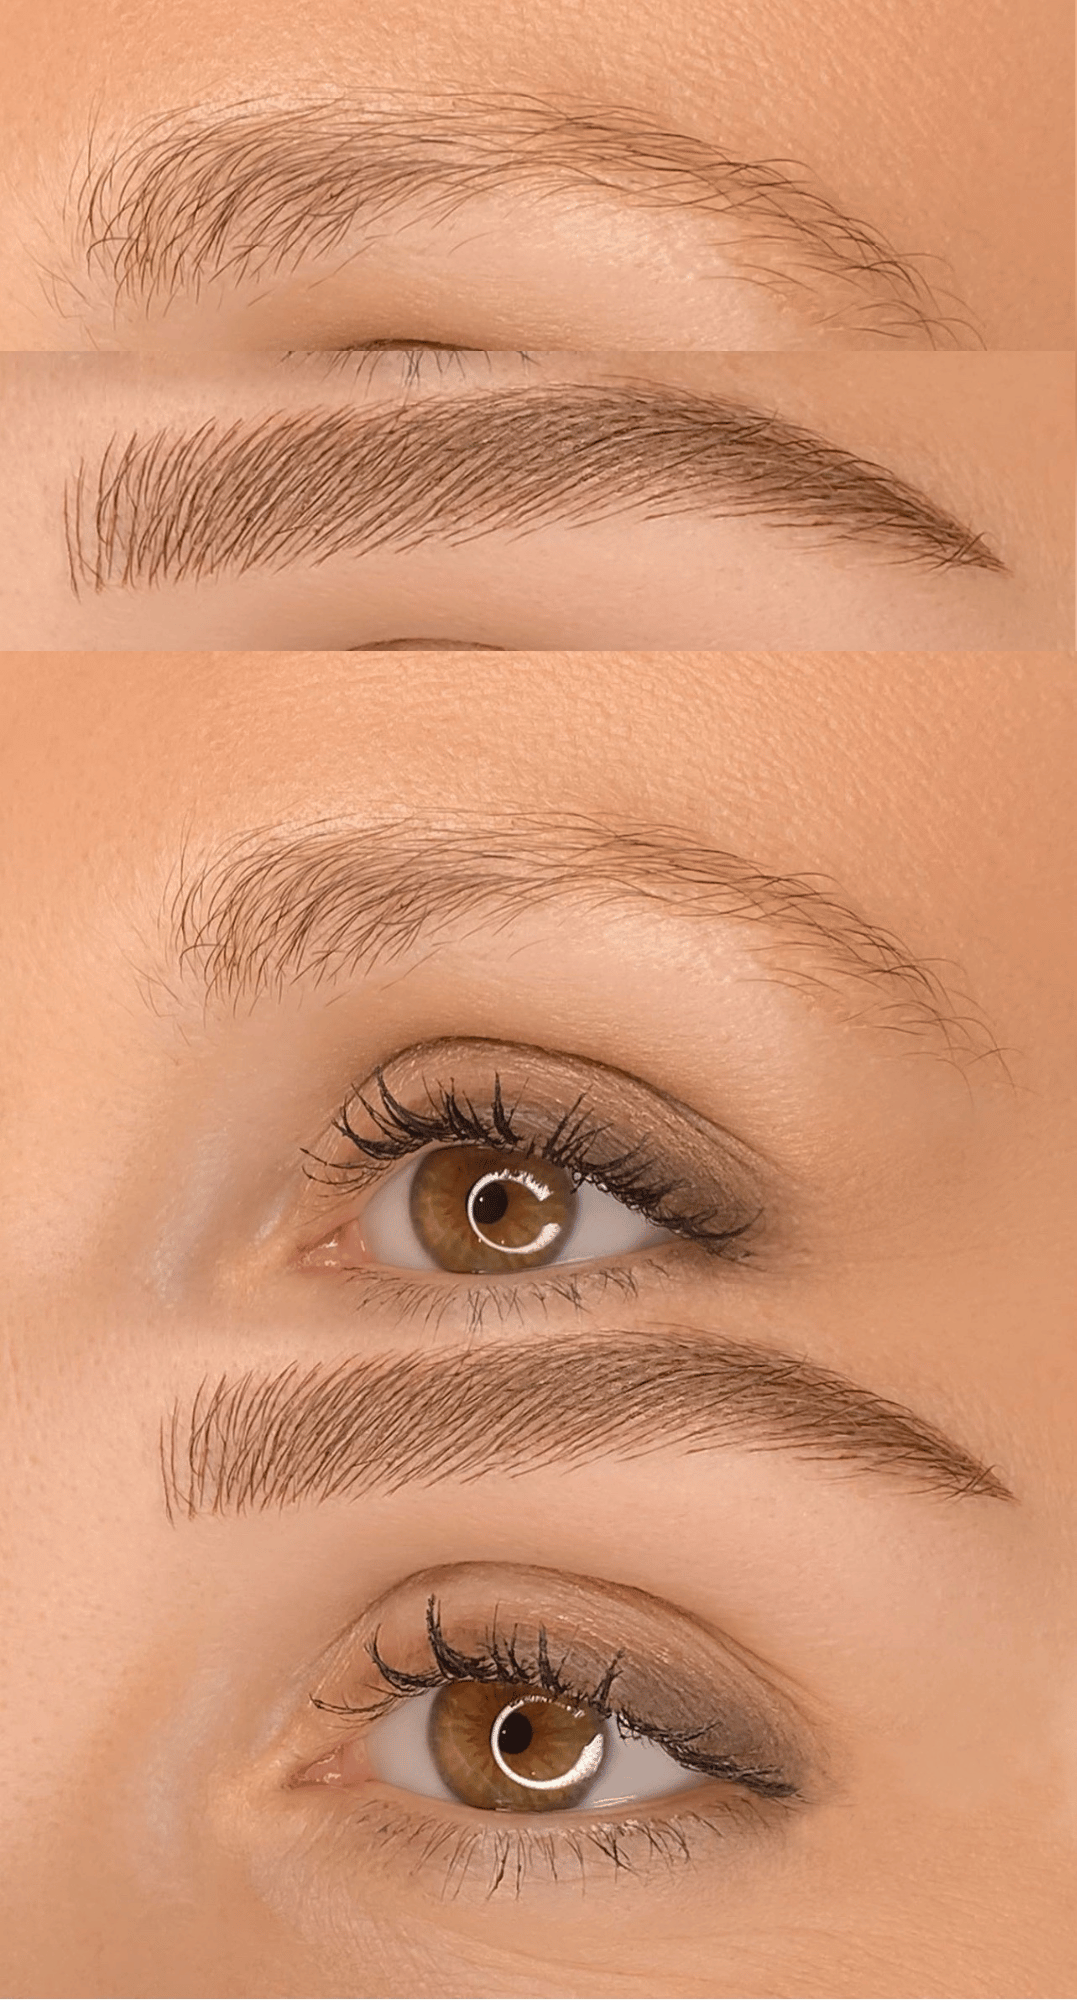 FORMATION Phibrows Microblading